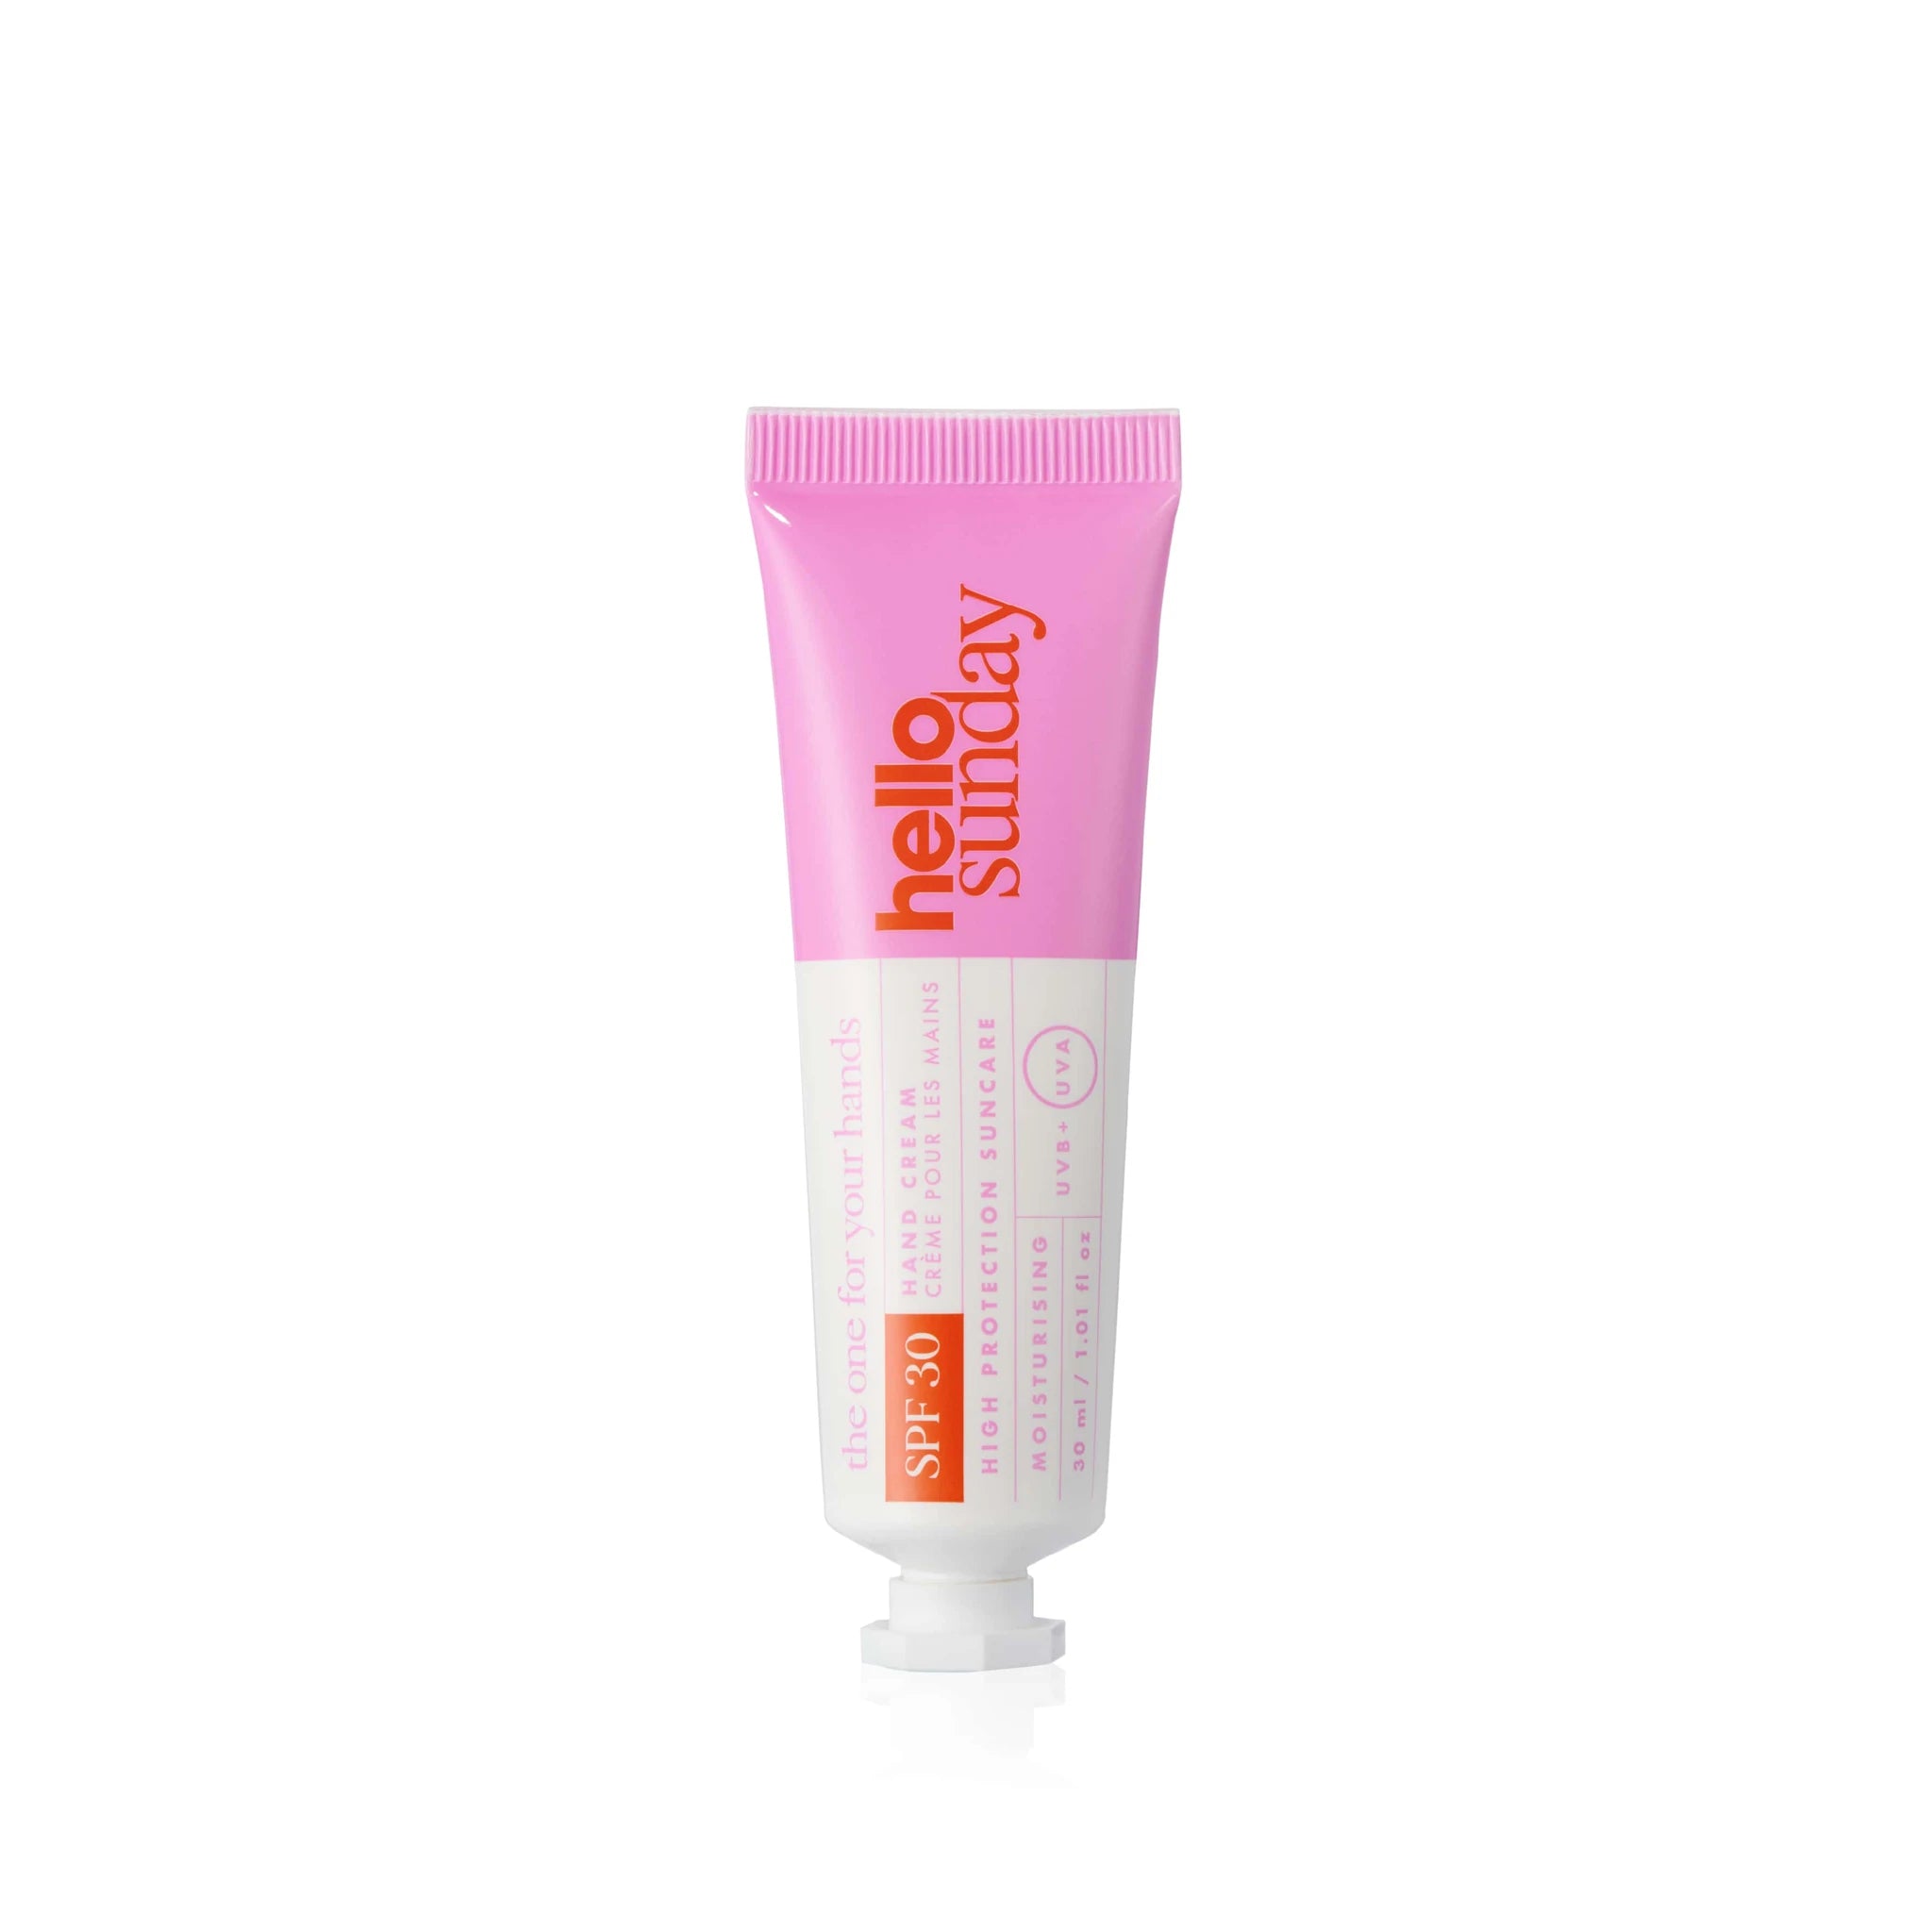 HELLO SUNDAY THE ONE FOR YOUR HANDS HAND CREAM - SPF 30